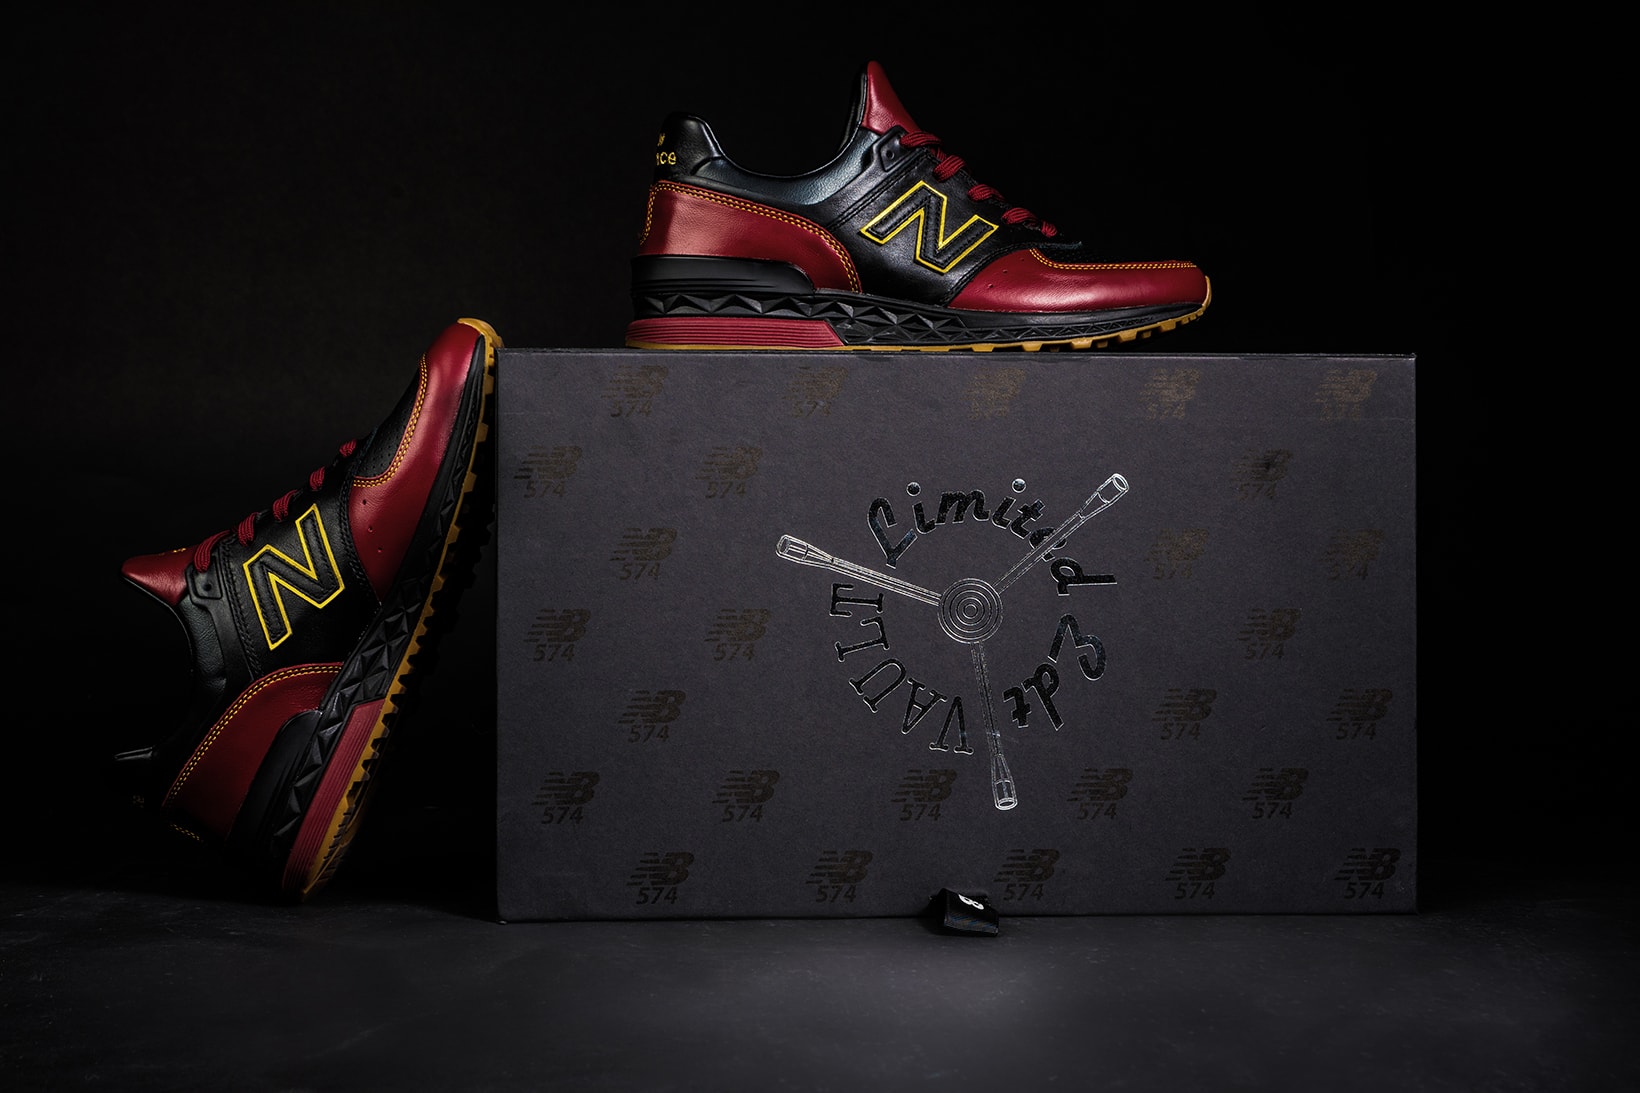 New Balance 574 Sport Limited EDT Vault Collaboration Singapore Exclusive Box 10 year anniversary